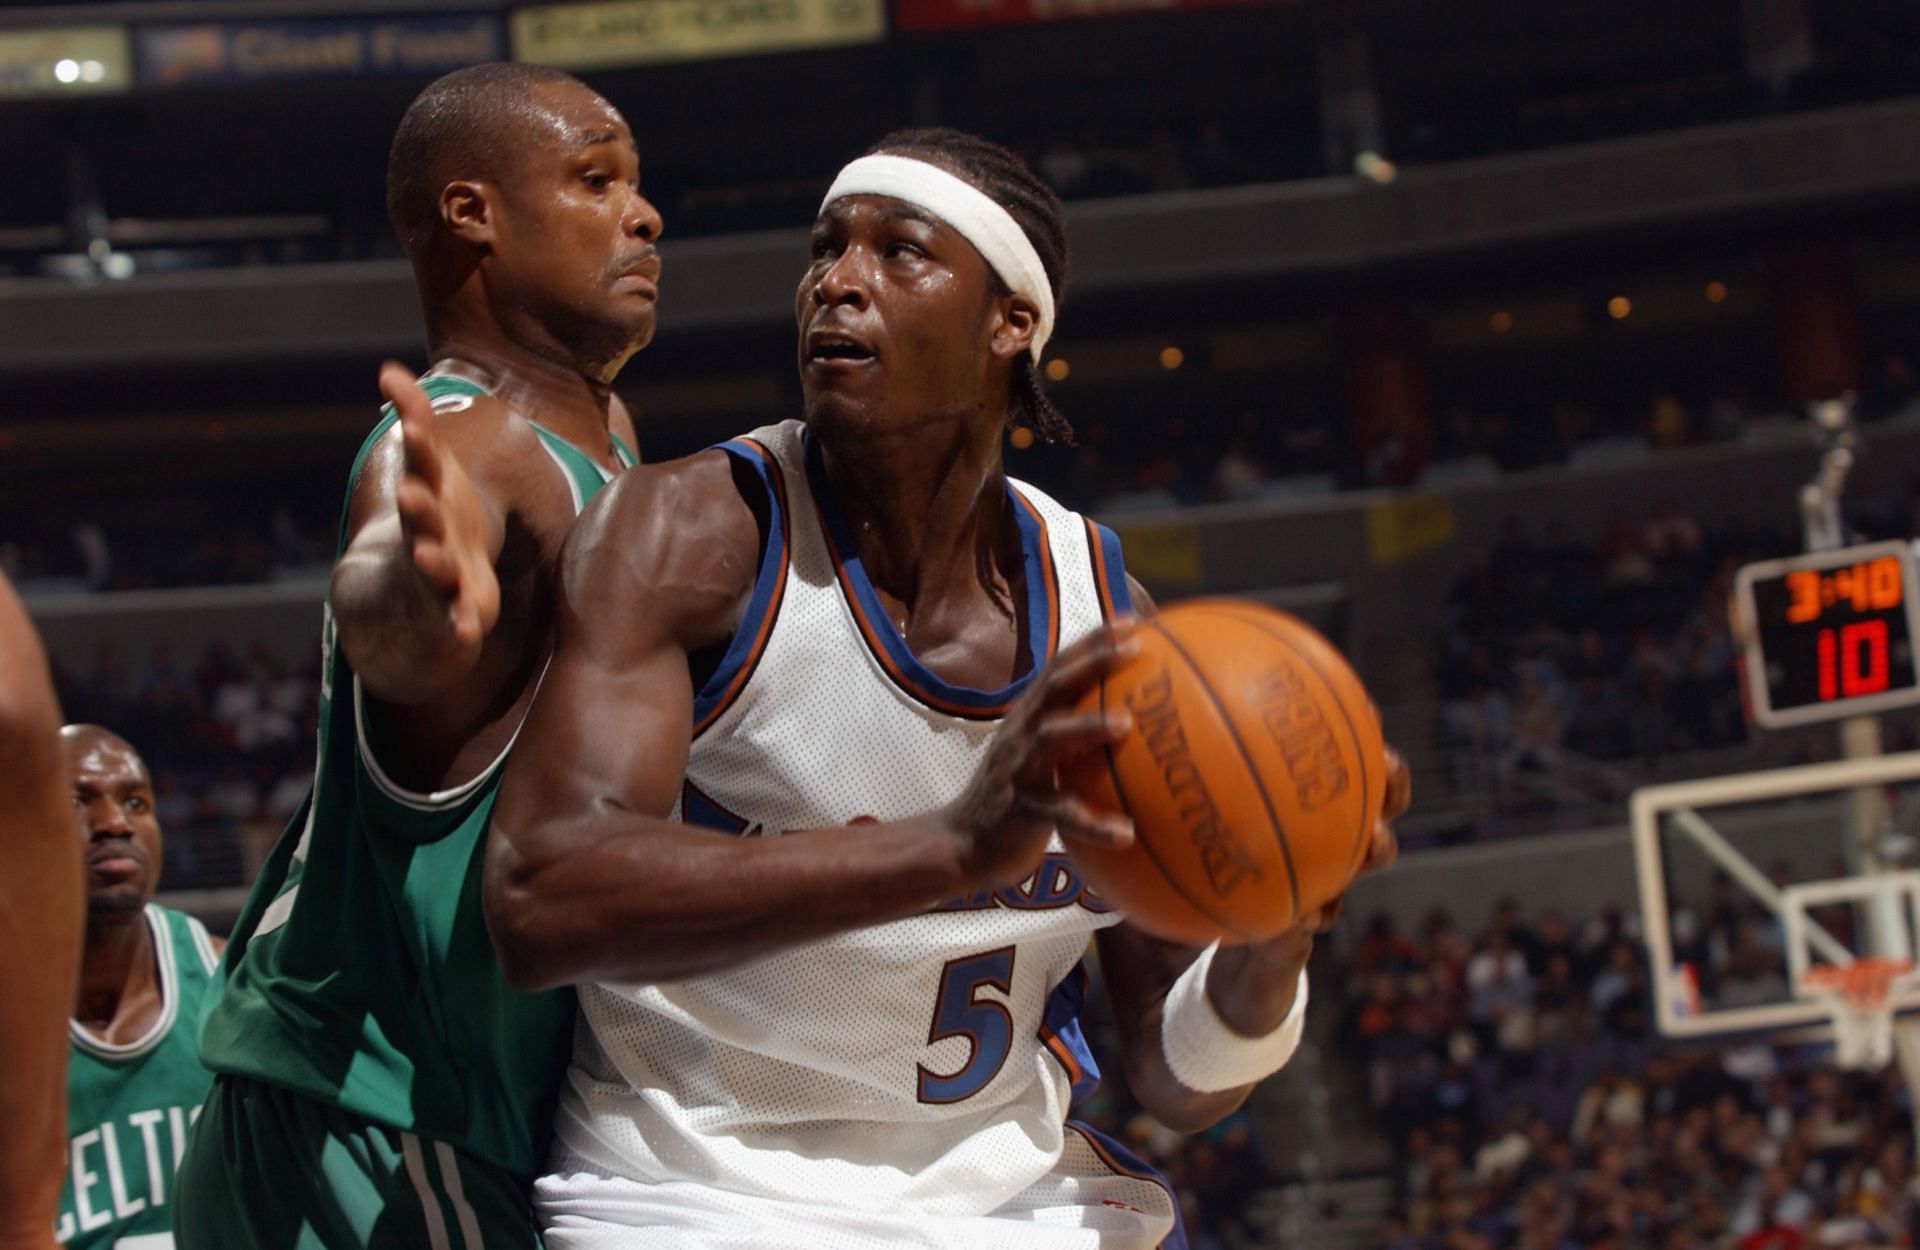 Kwame Brown of the Washington Wizards